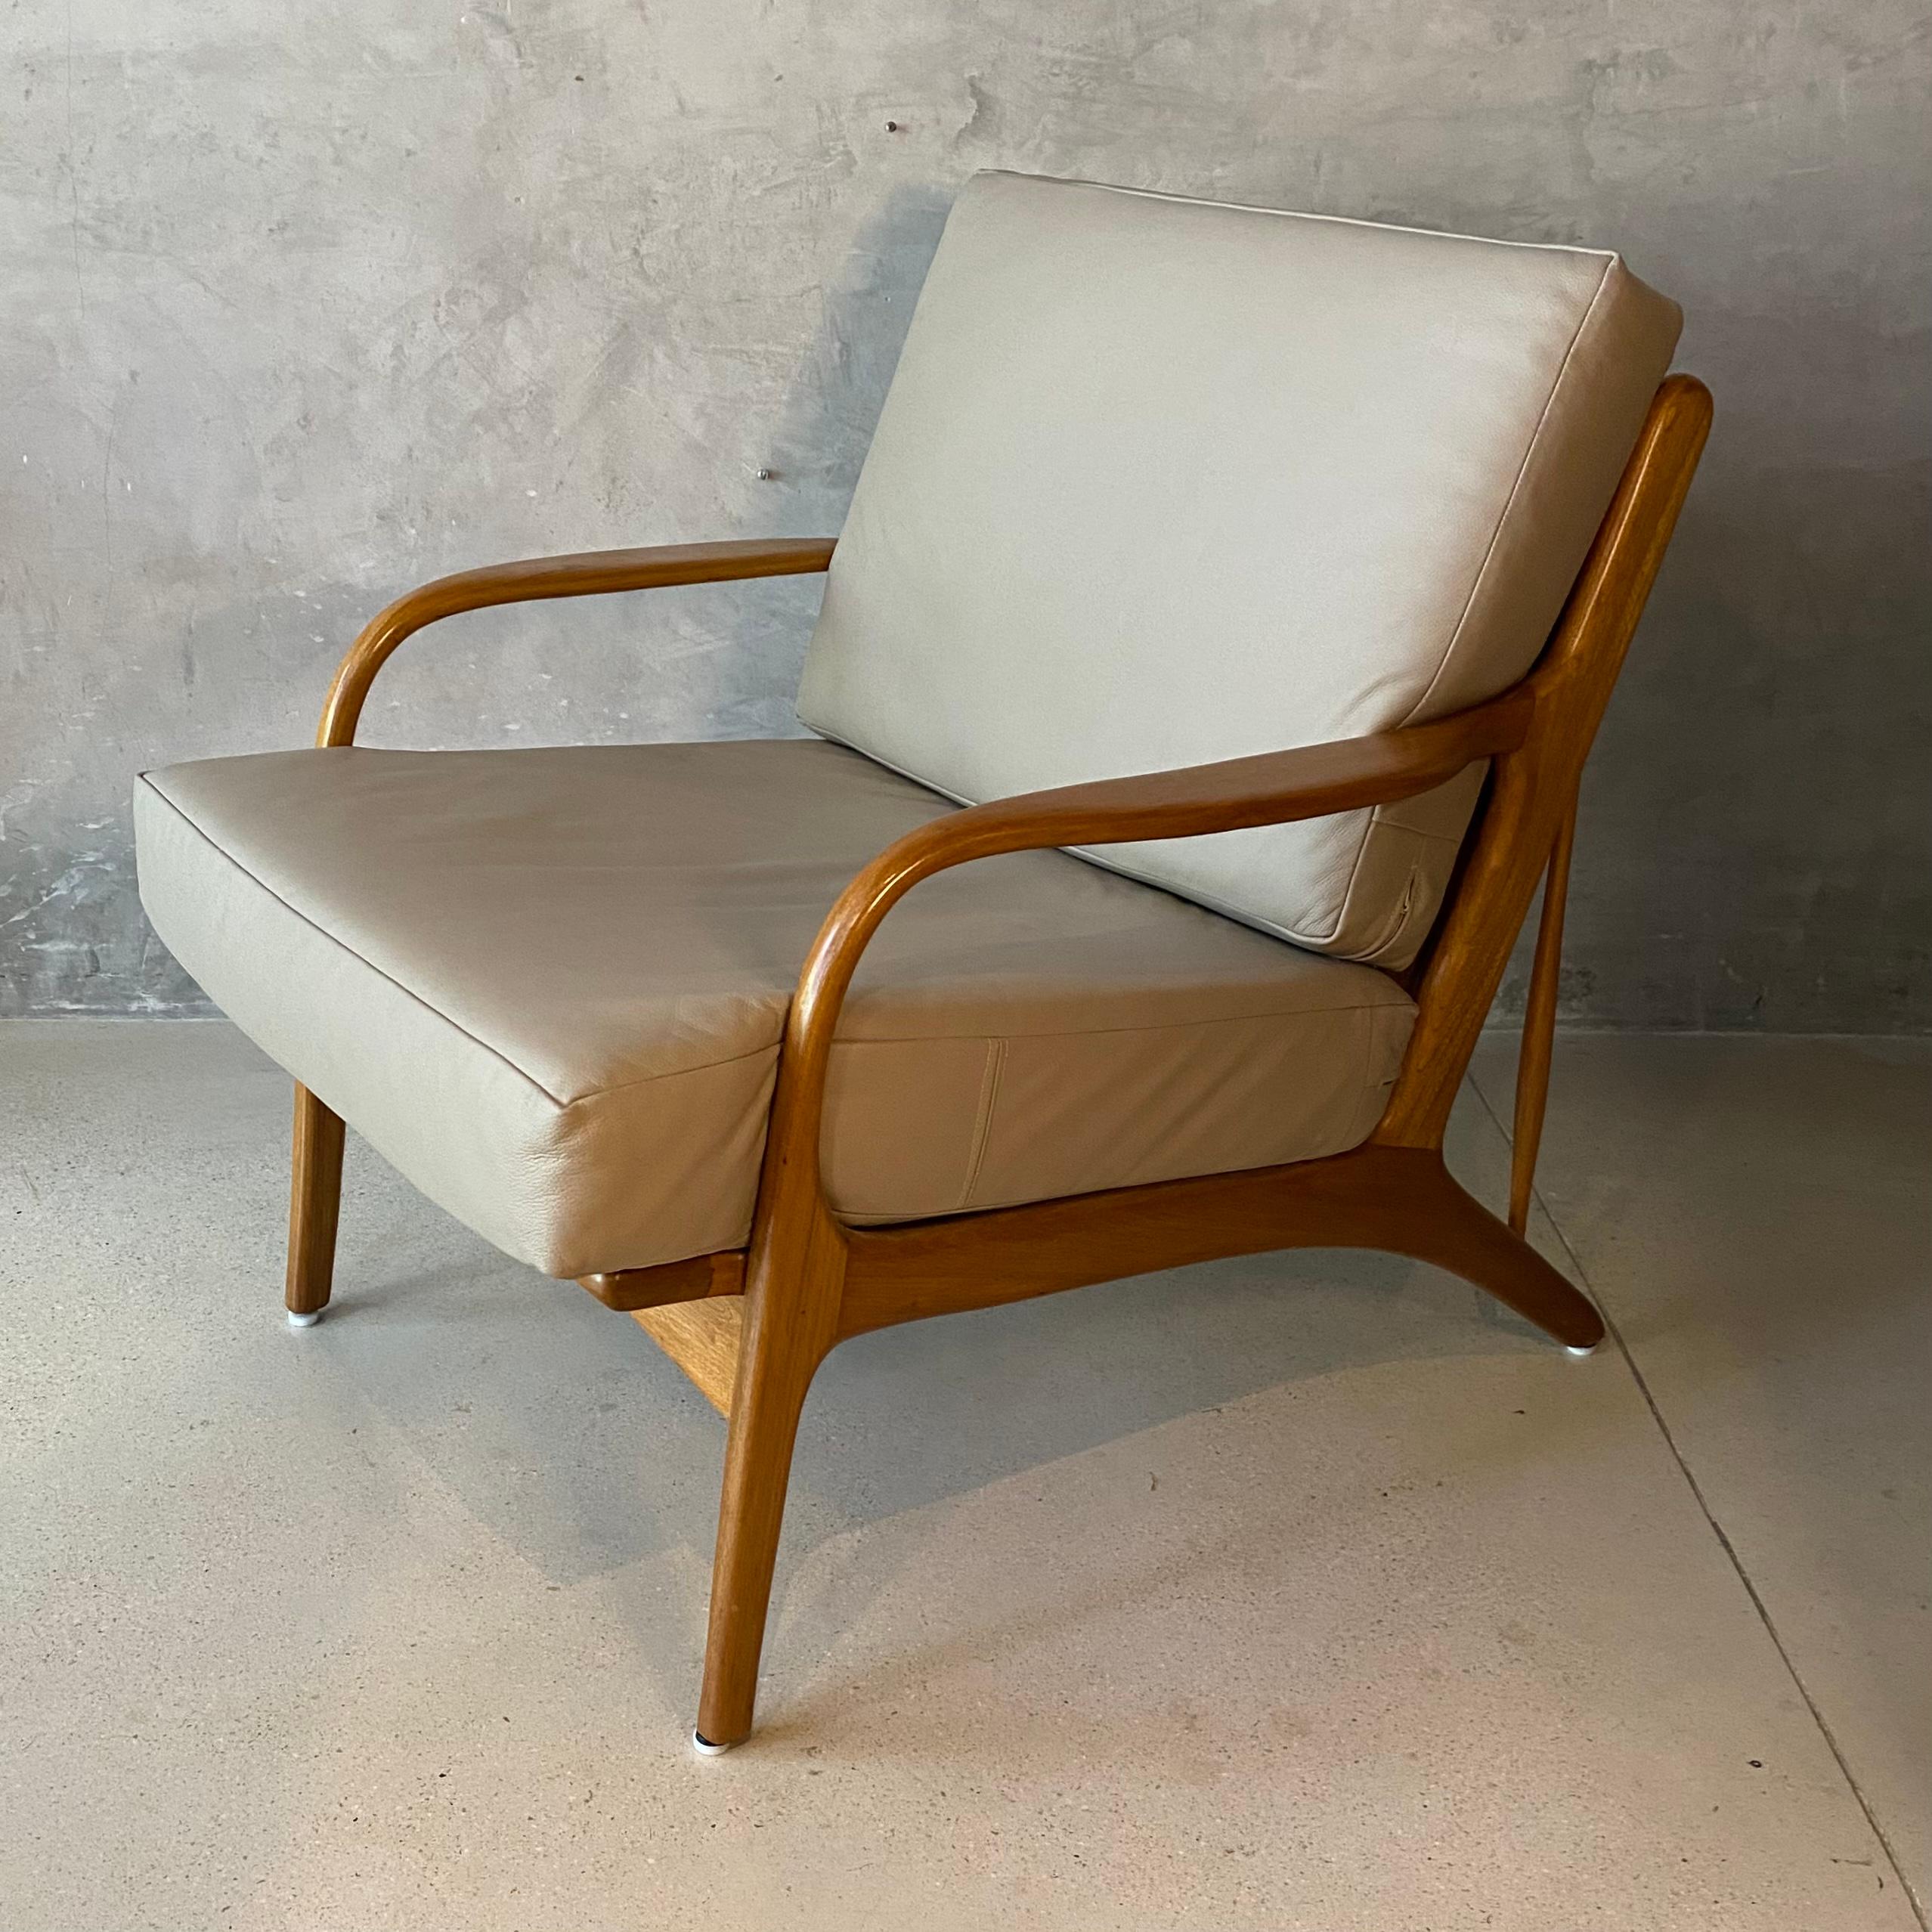 Mid-20th Century Mexican Midcentury Lounge Chair, “Malinche“, 1950s For Sale